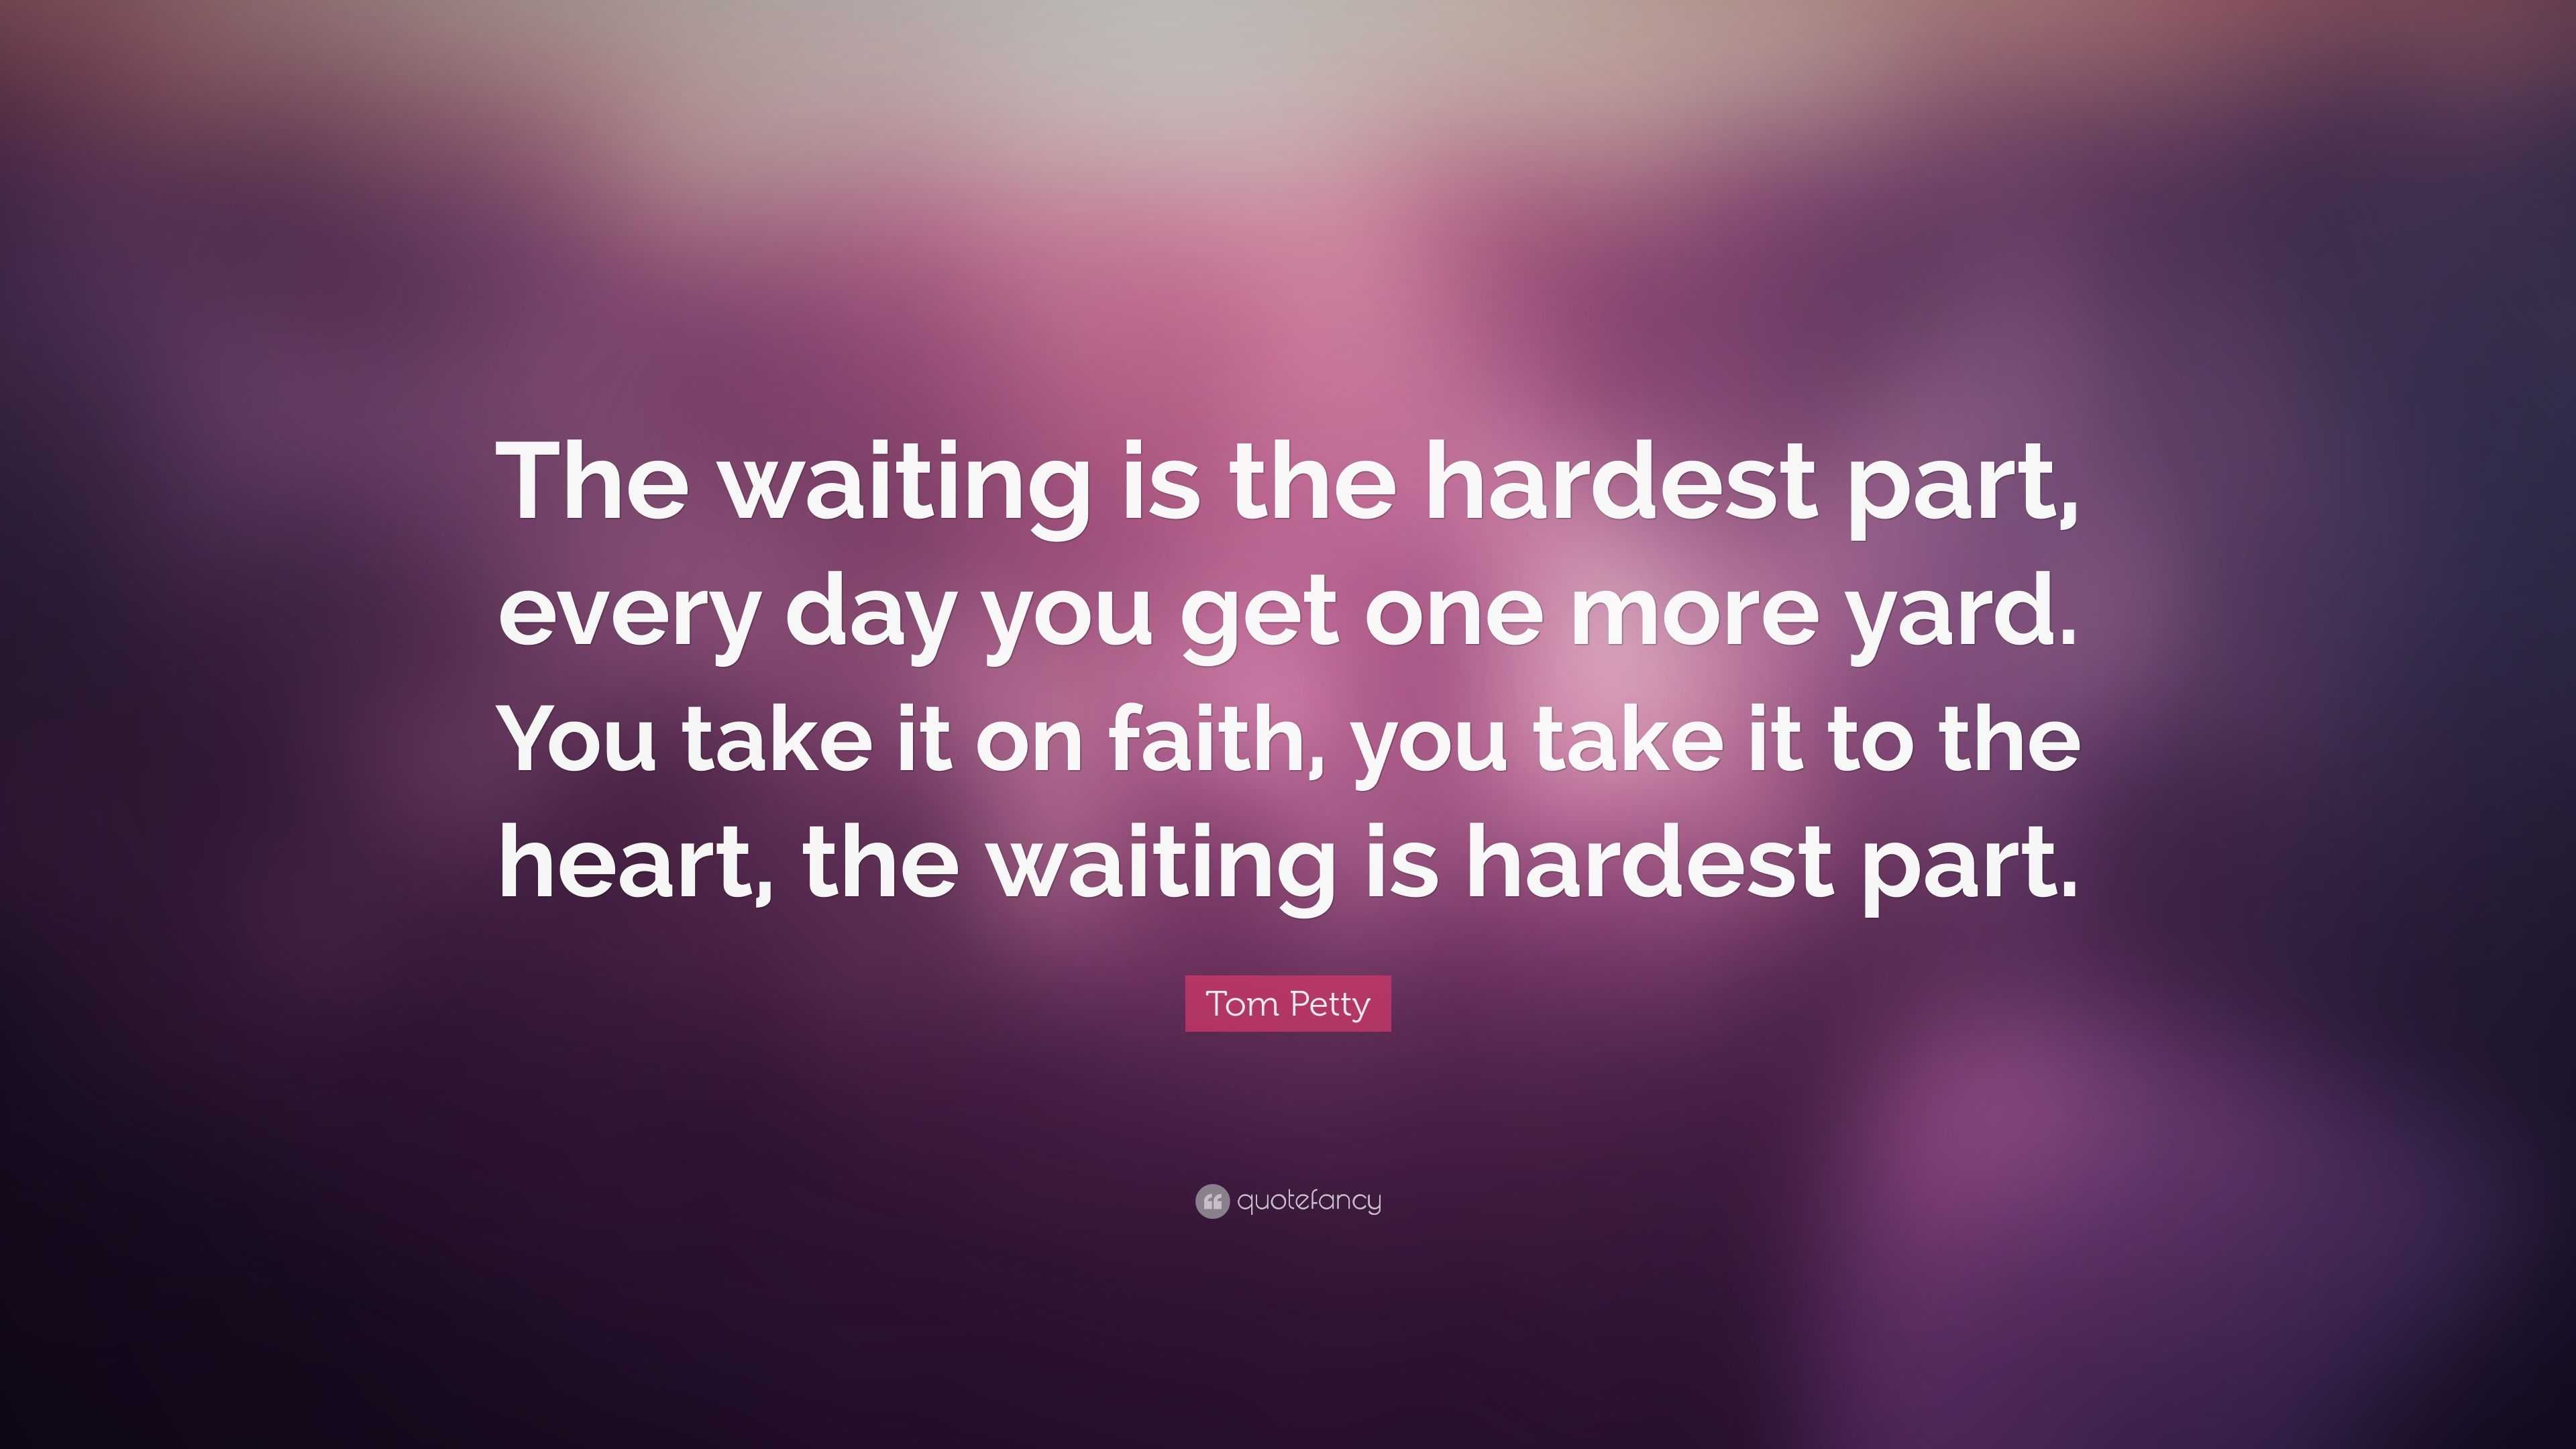 Tom Petty Quote: “The waiting is the hardest part, every day you get ...